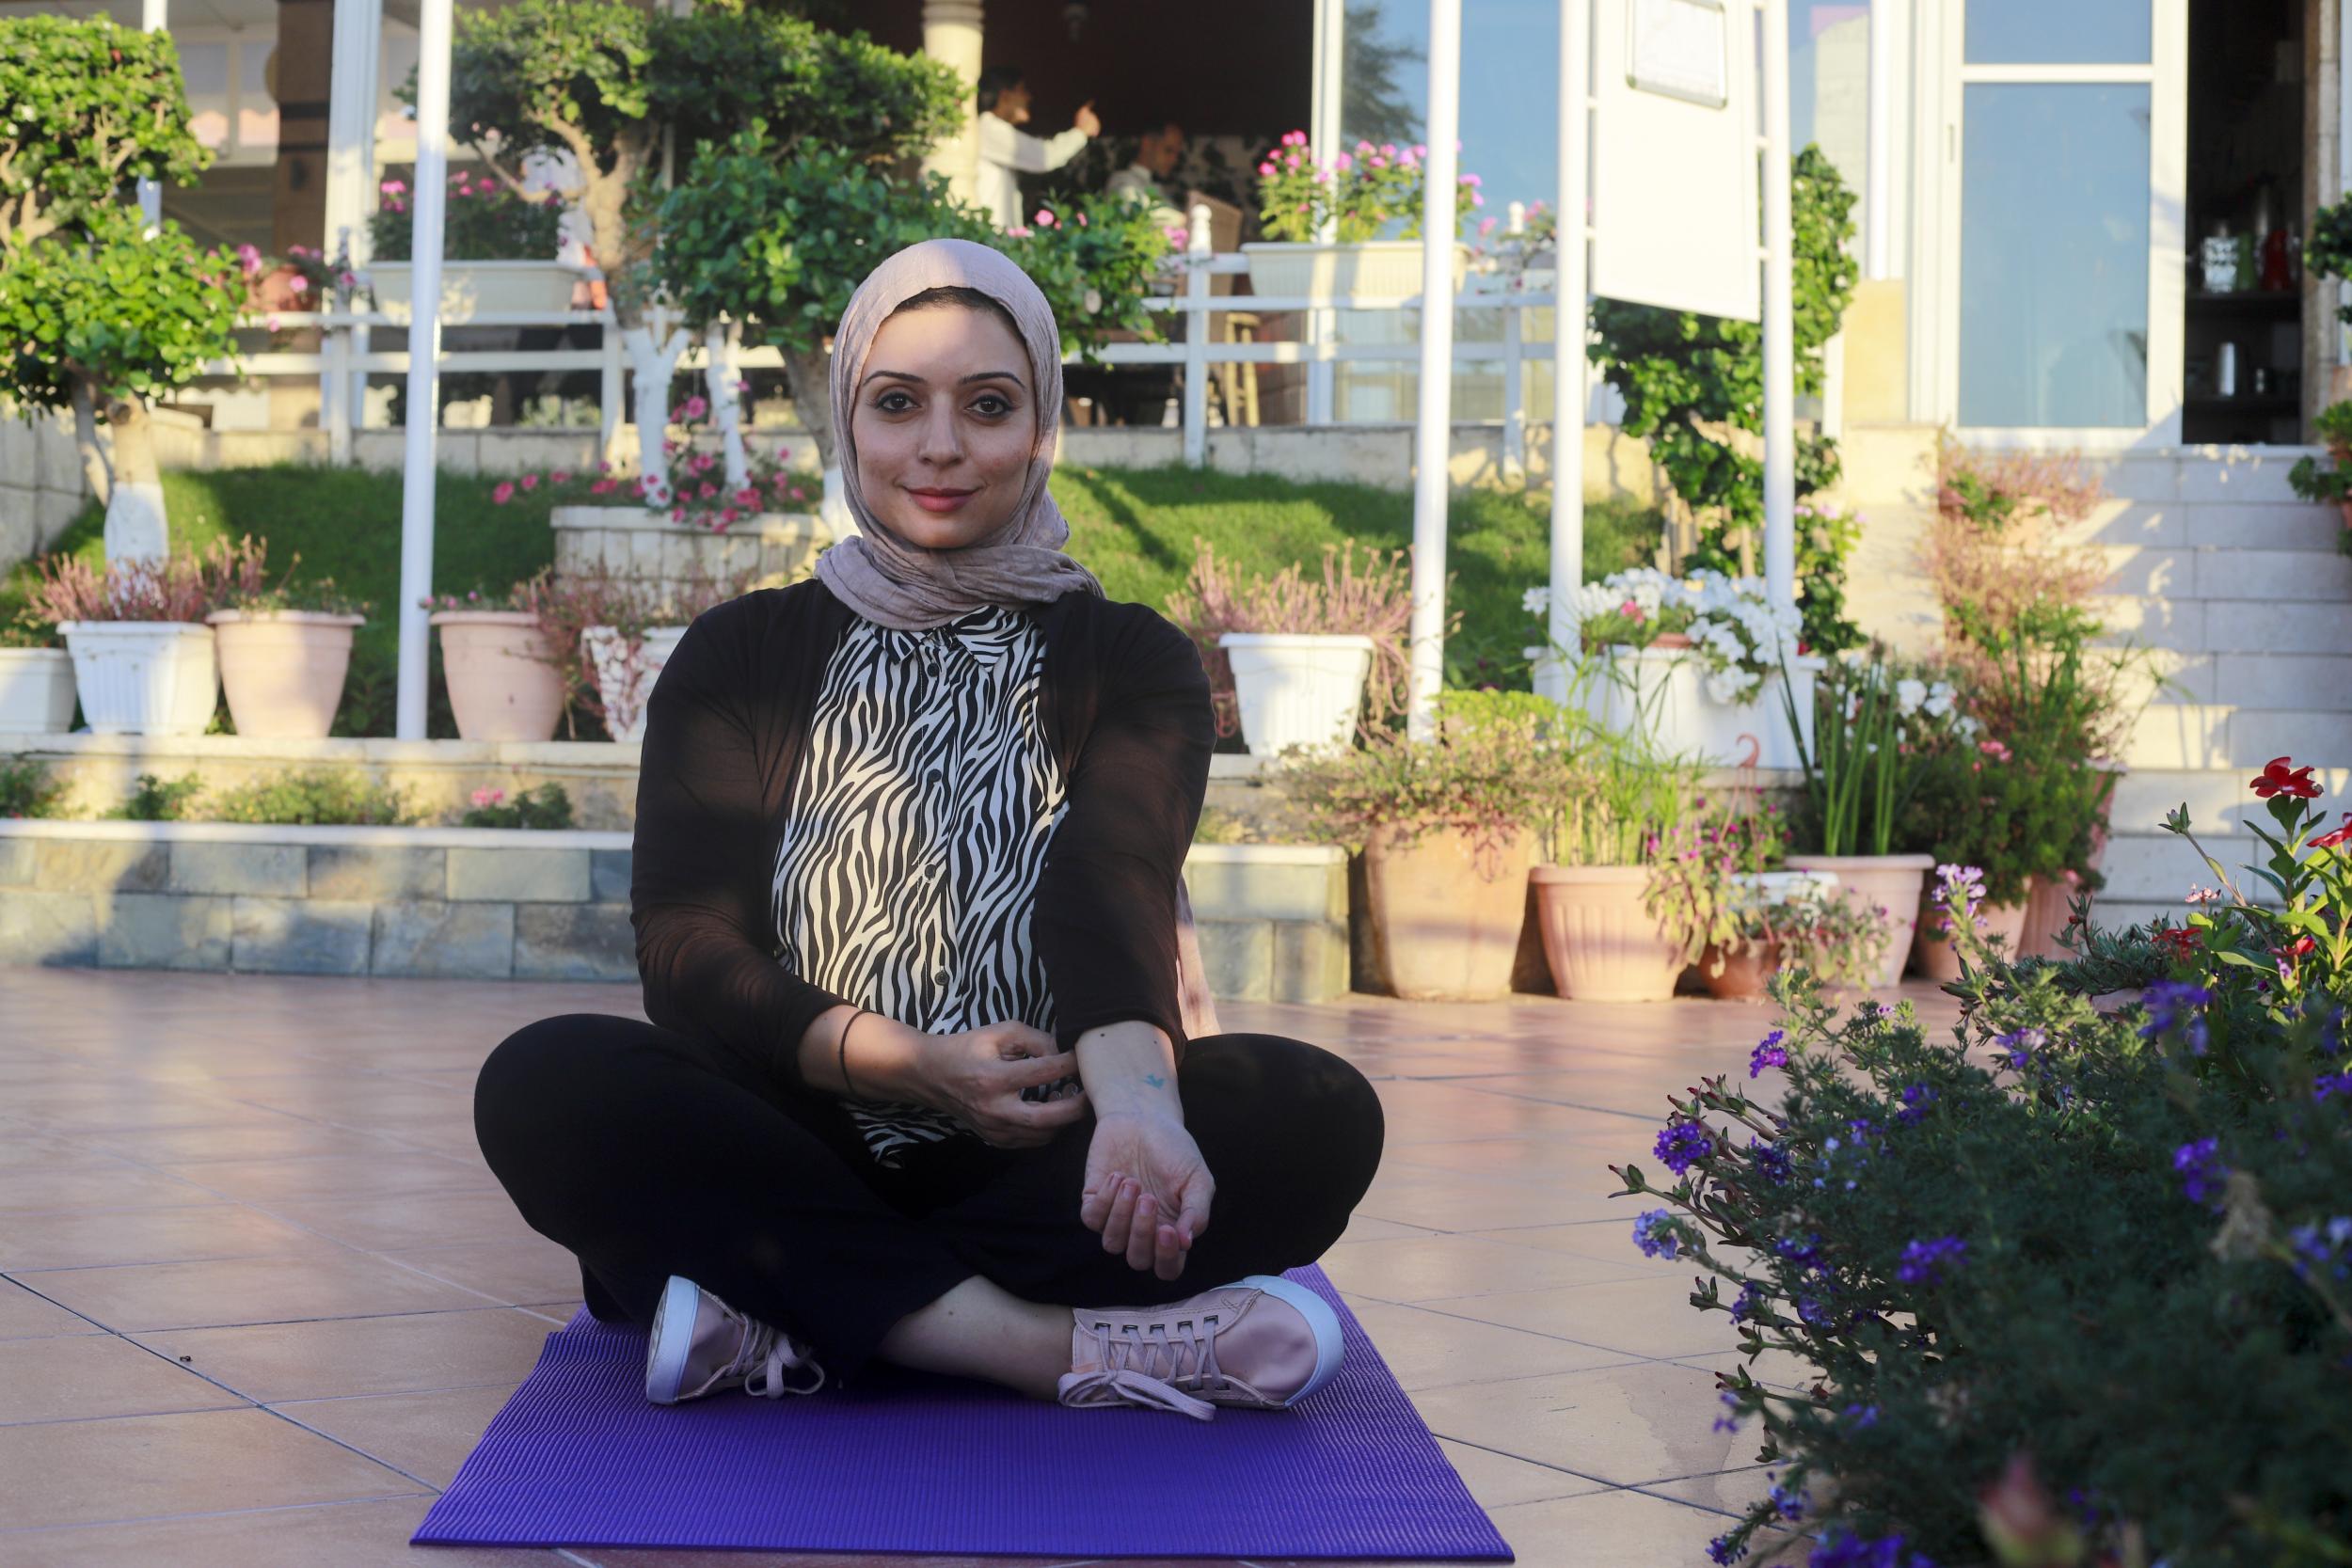 Ghada Ibrahim, 33, is a Code Academy programme officer and yogi. She has three children aged four, nine and 10